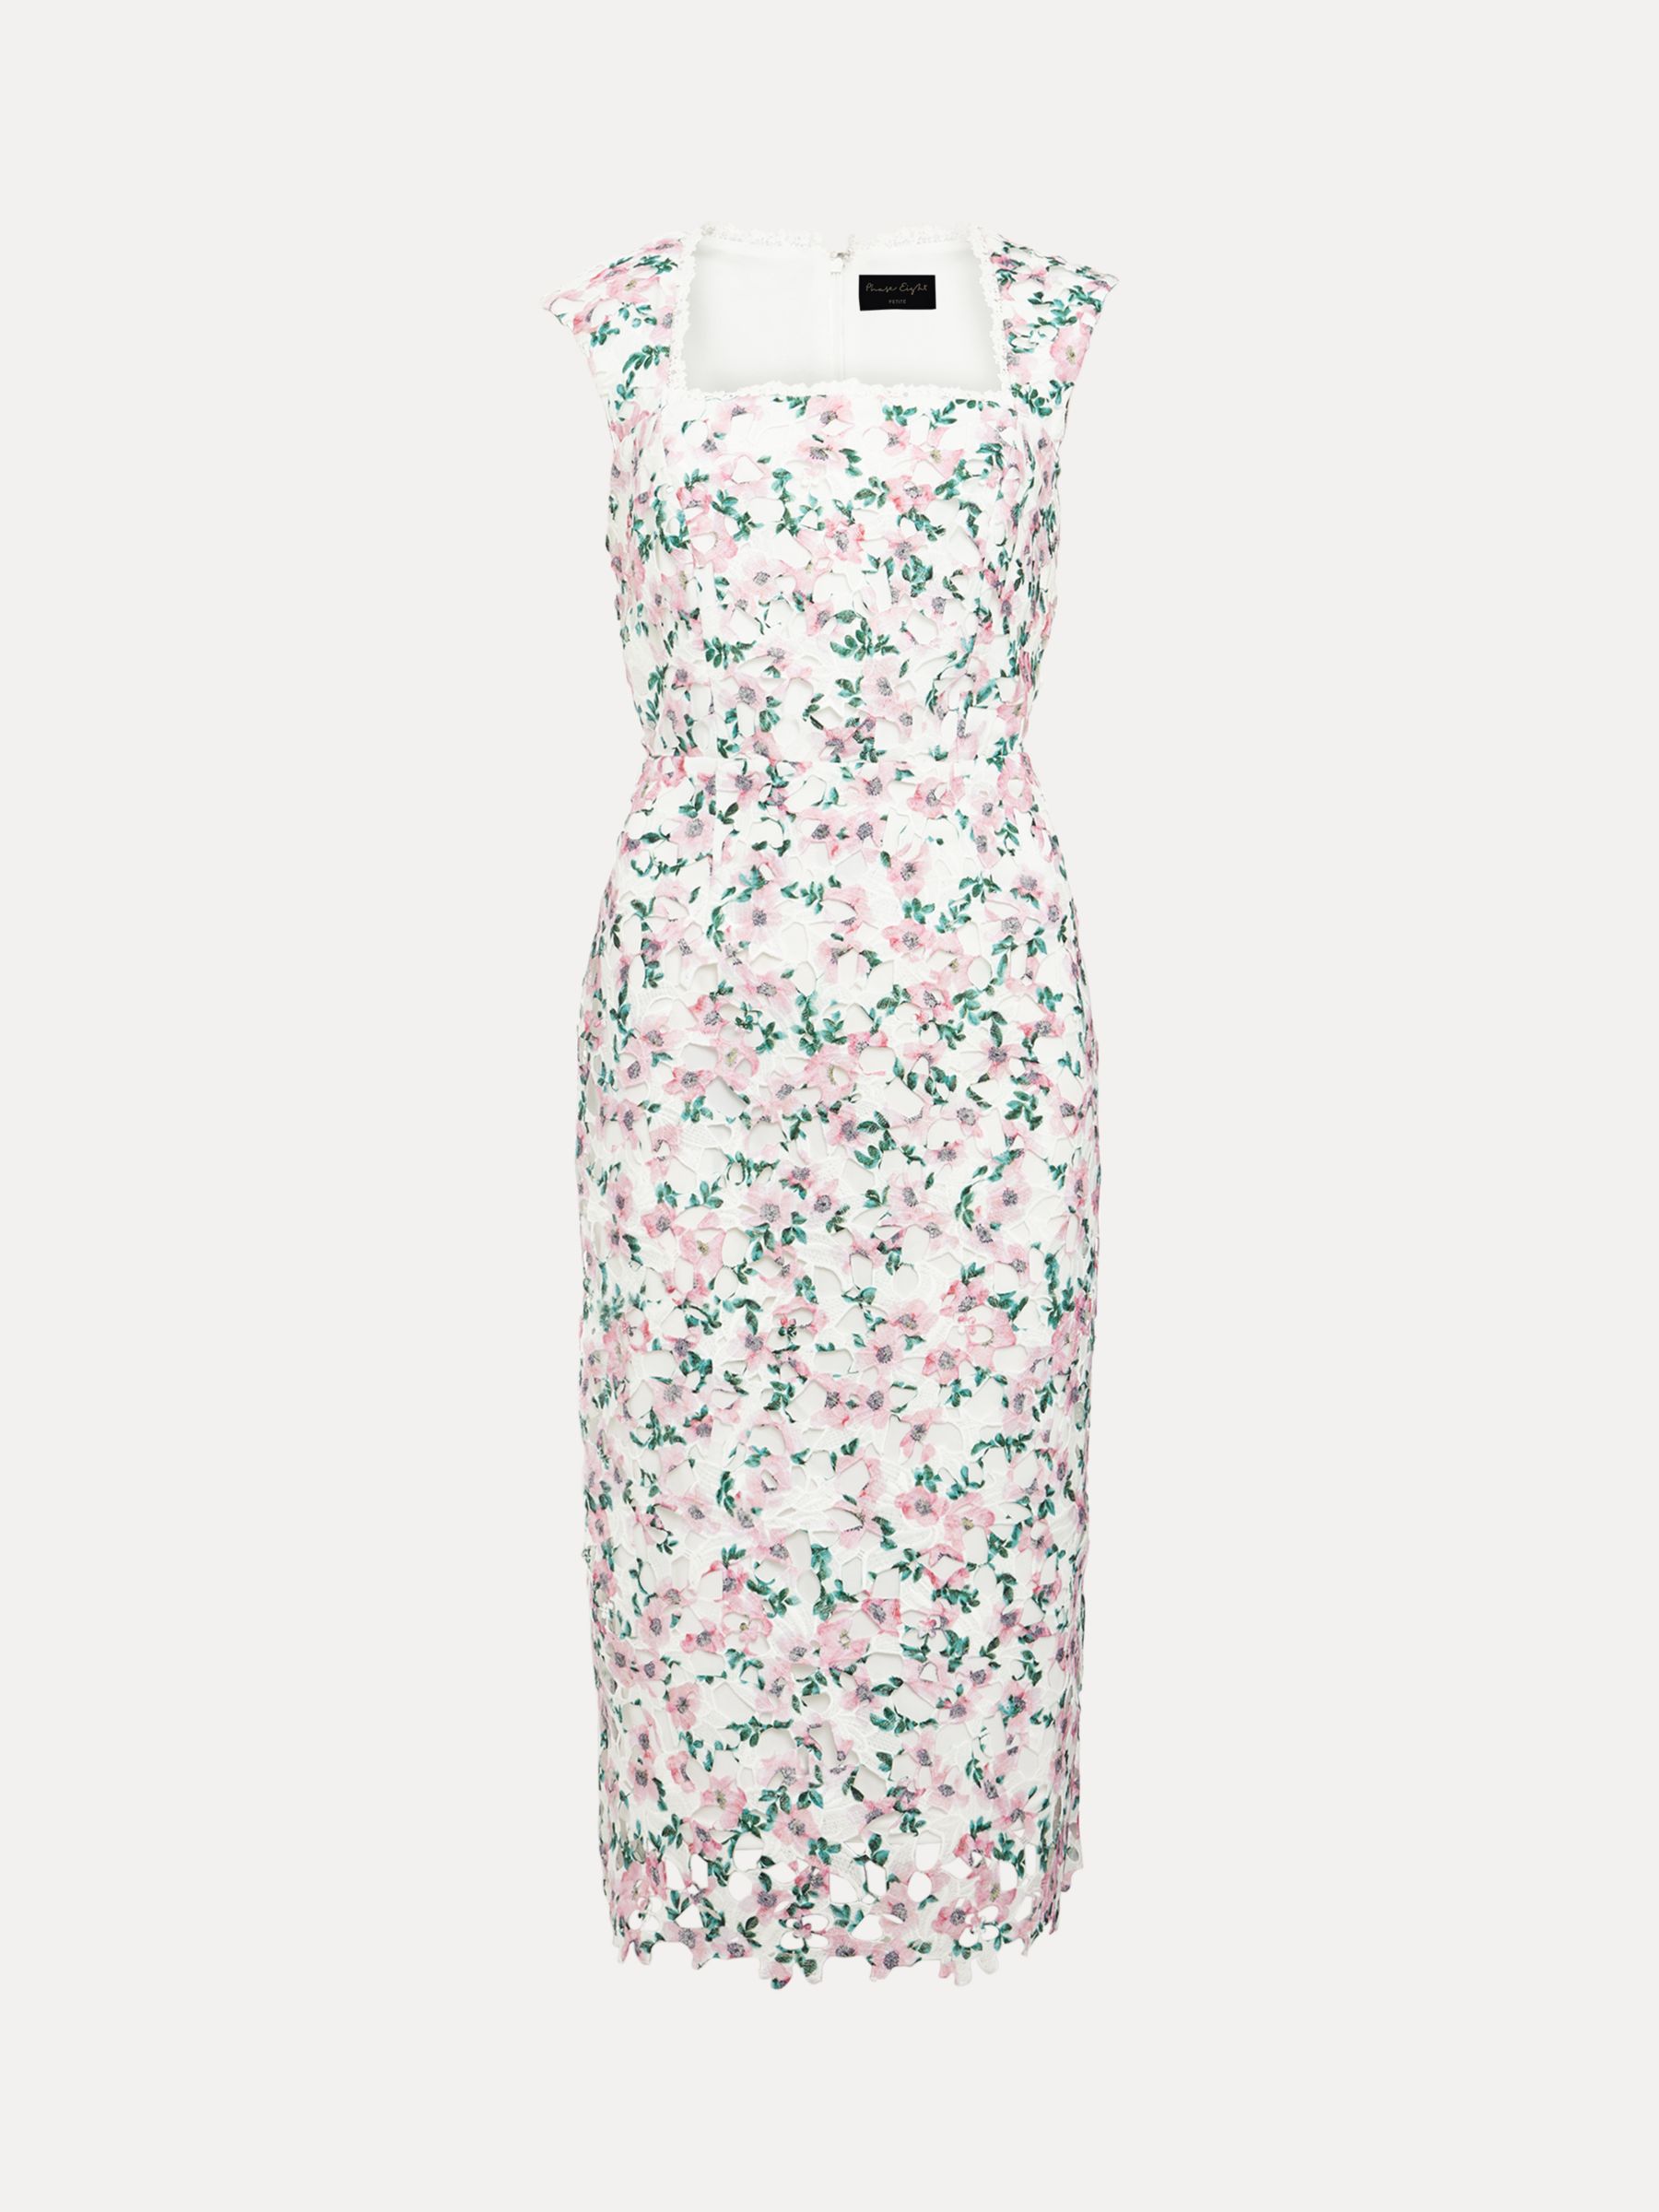 Buy Phase Eight Petite Diana Floral Lace Midi Dress, White/Multi Online at johnlewis.com